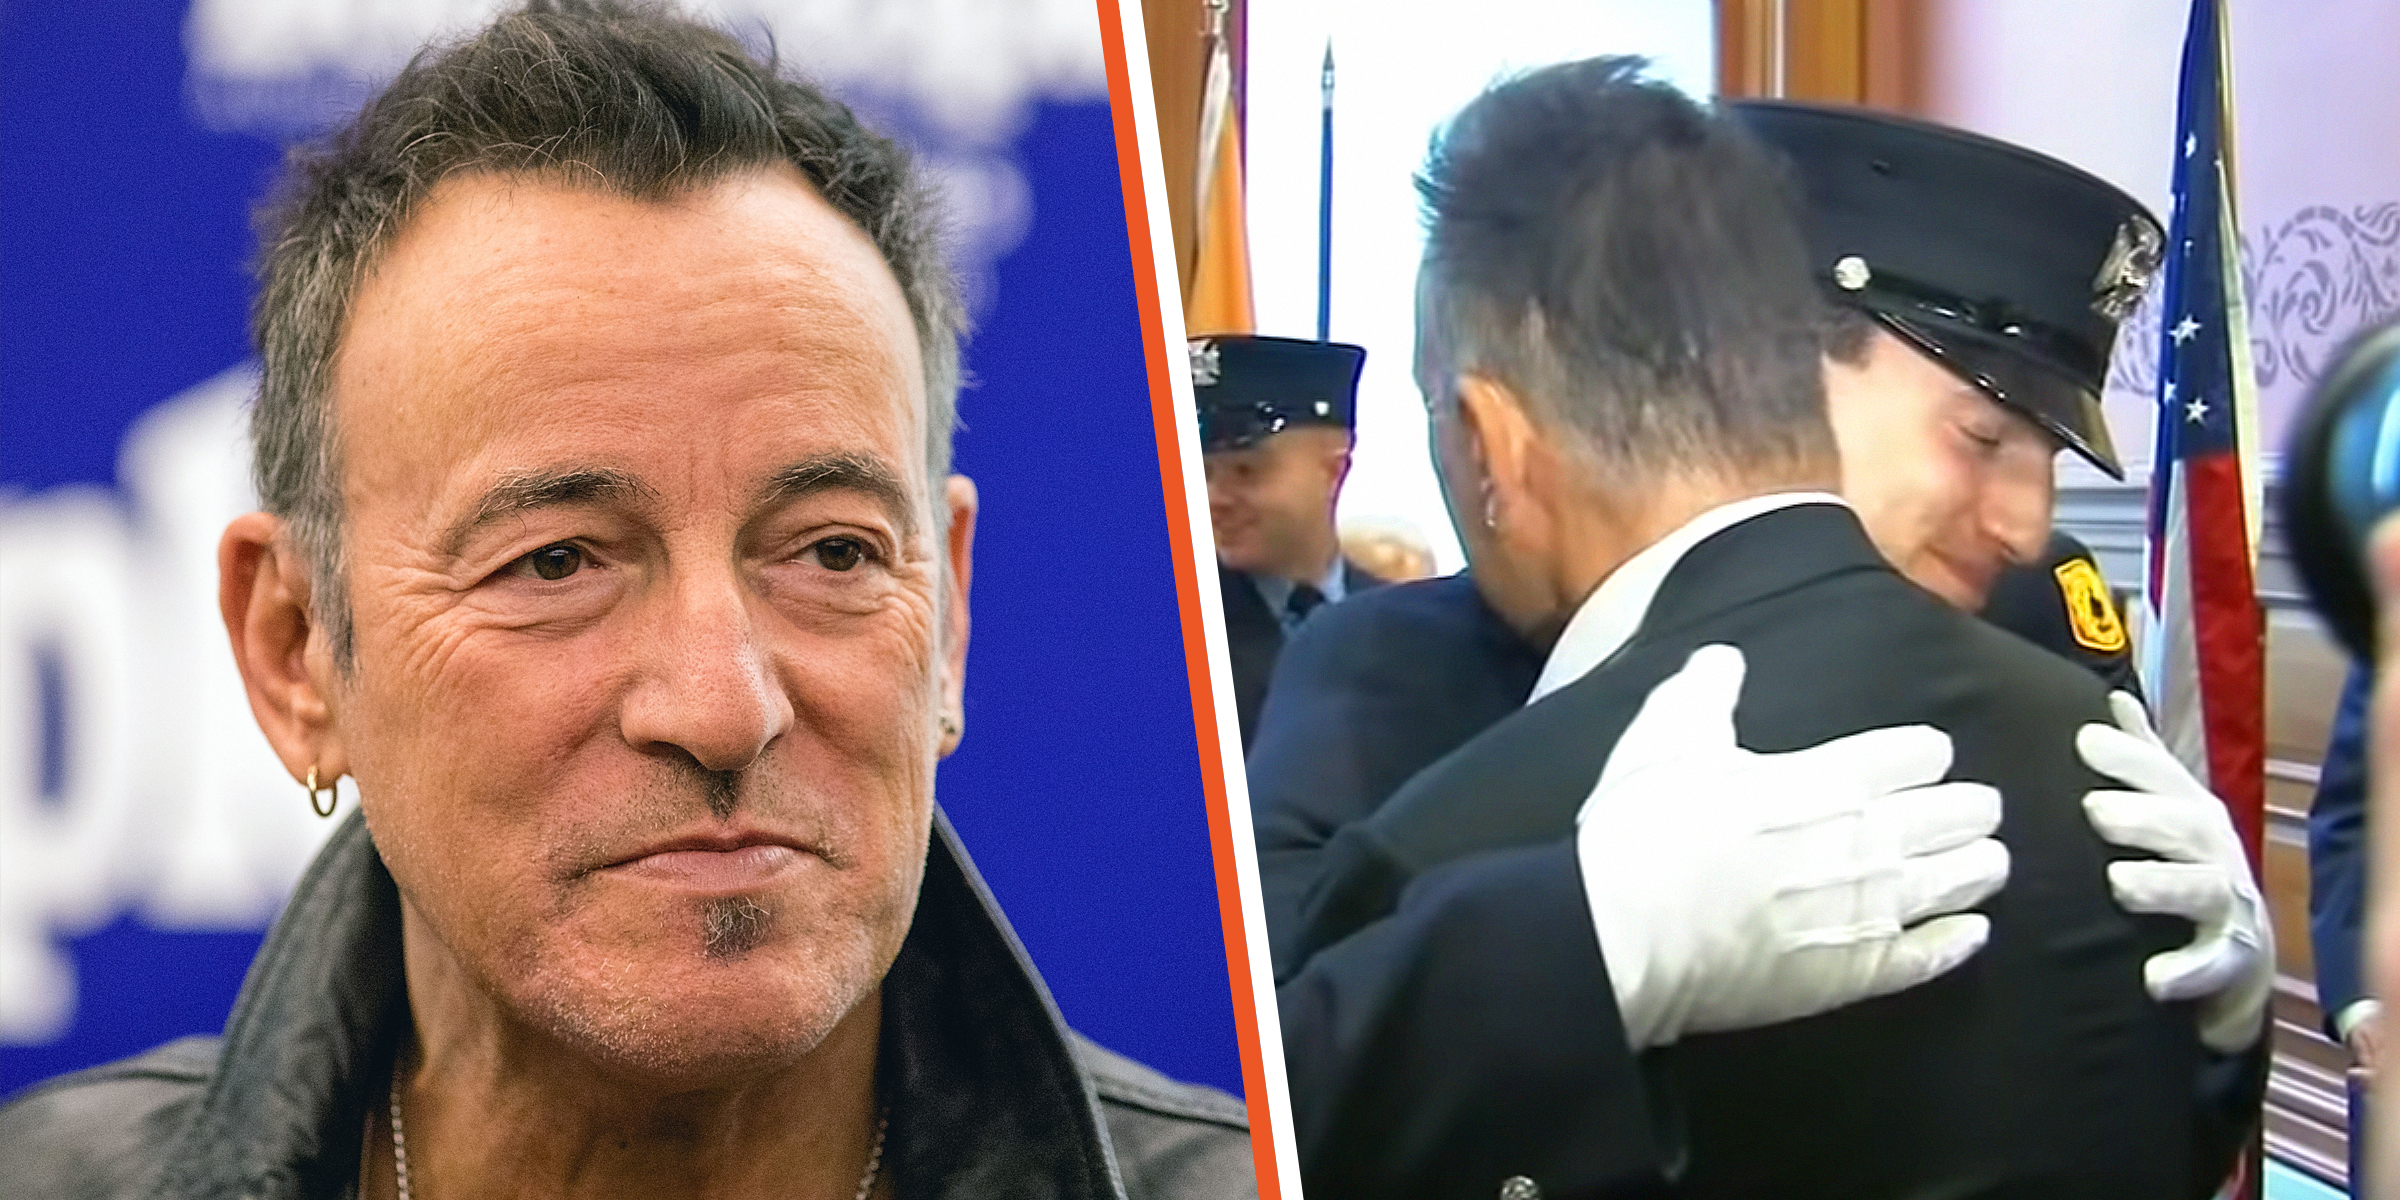 Bruce Springsteen | Bruce Springsteen and Sam Ryan | Source: Getty Images youtube.com/Eyewitness News ABC7NY